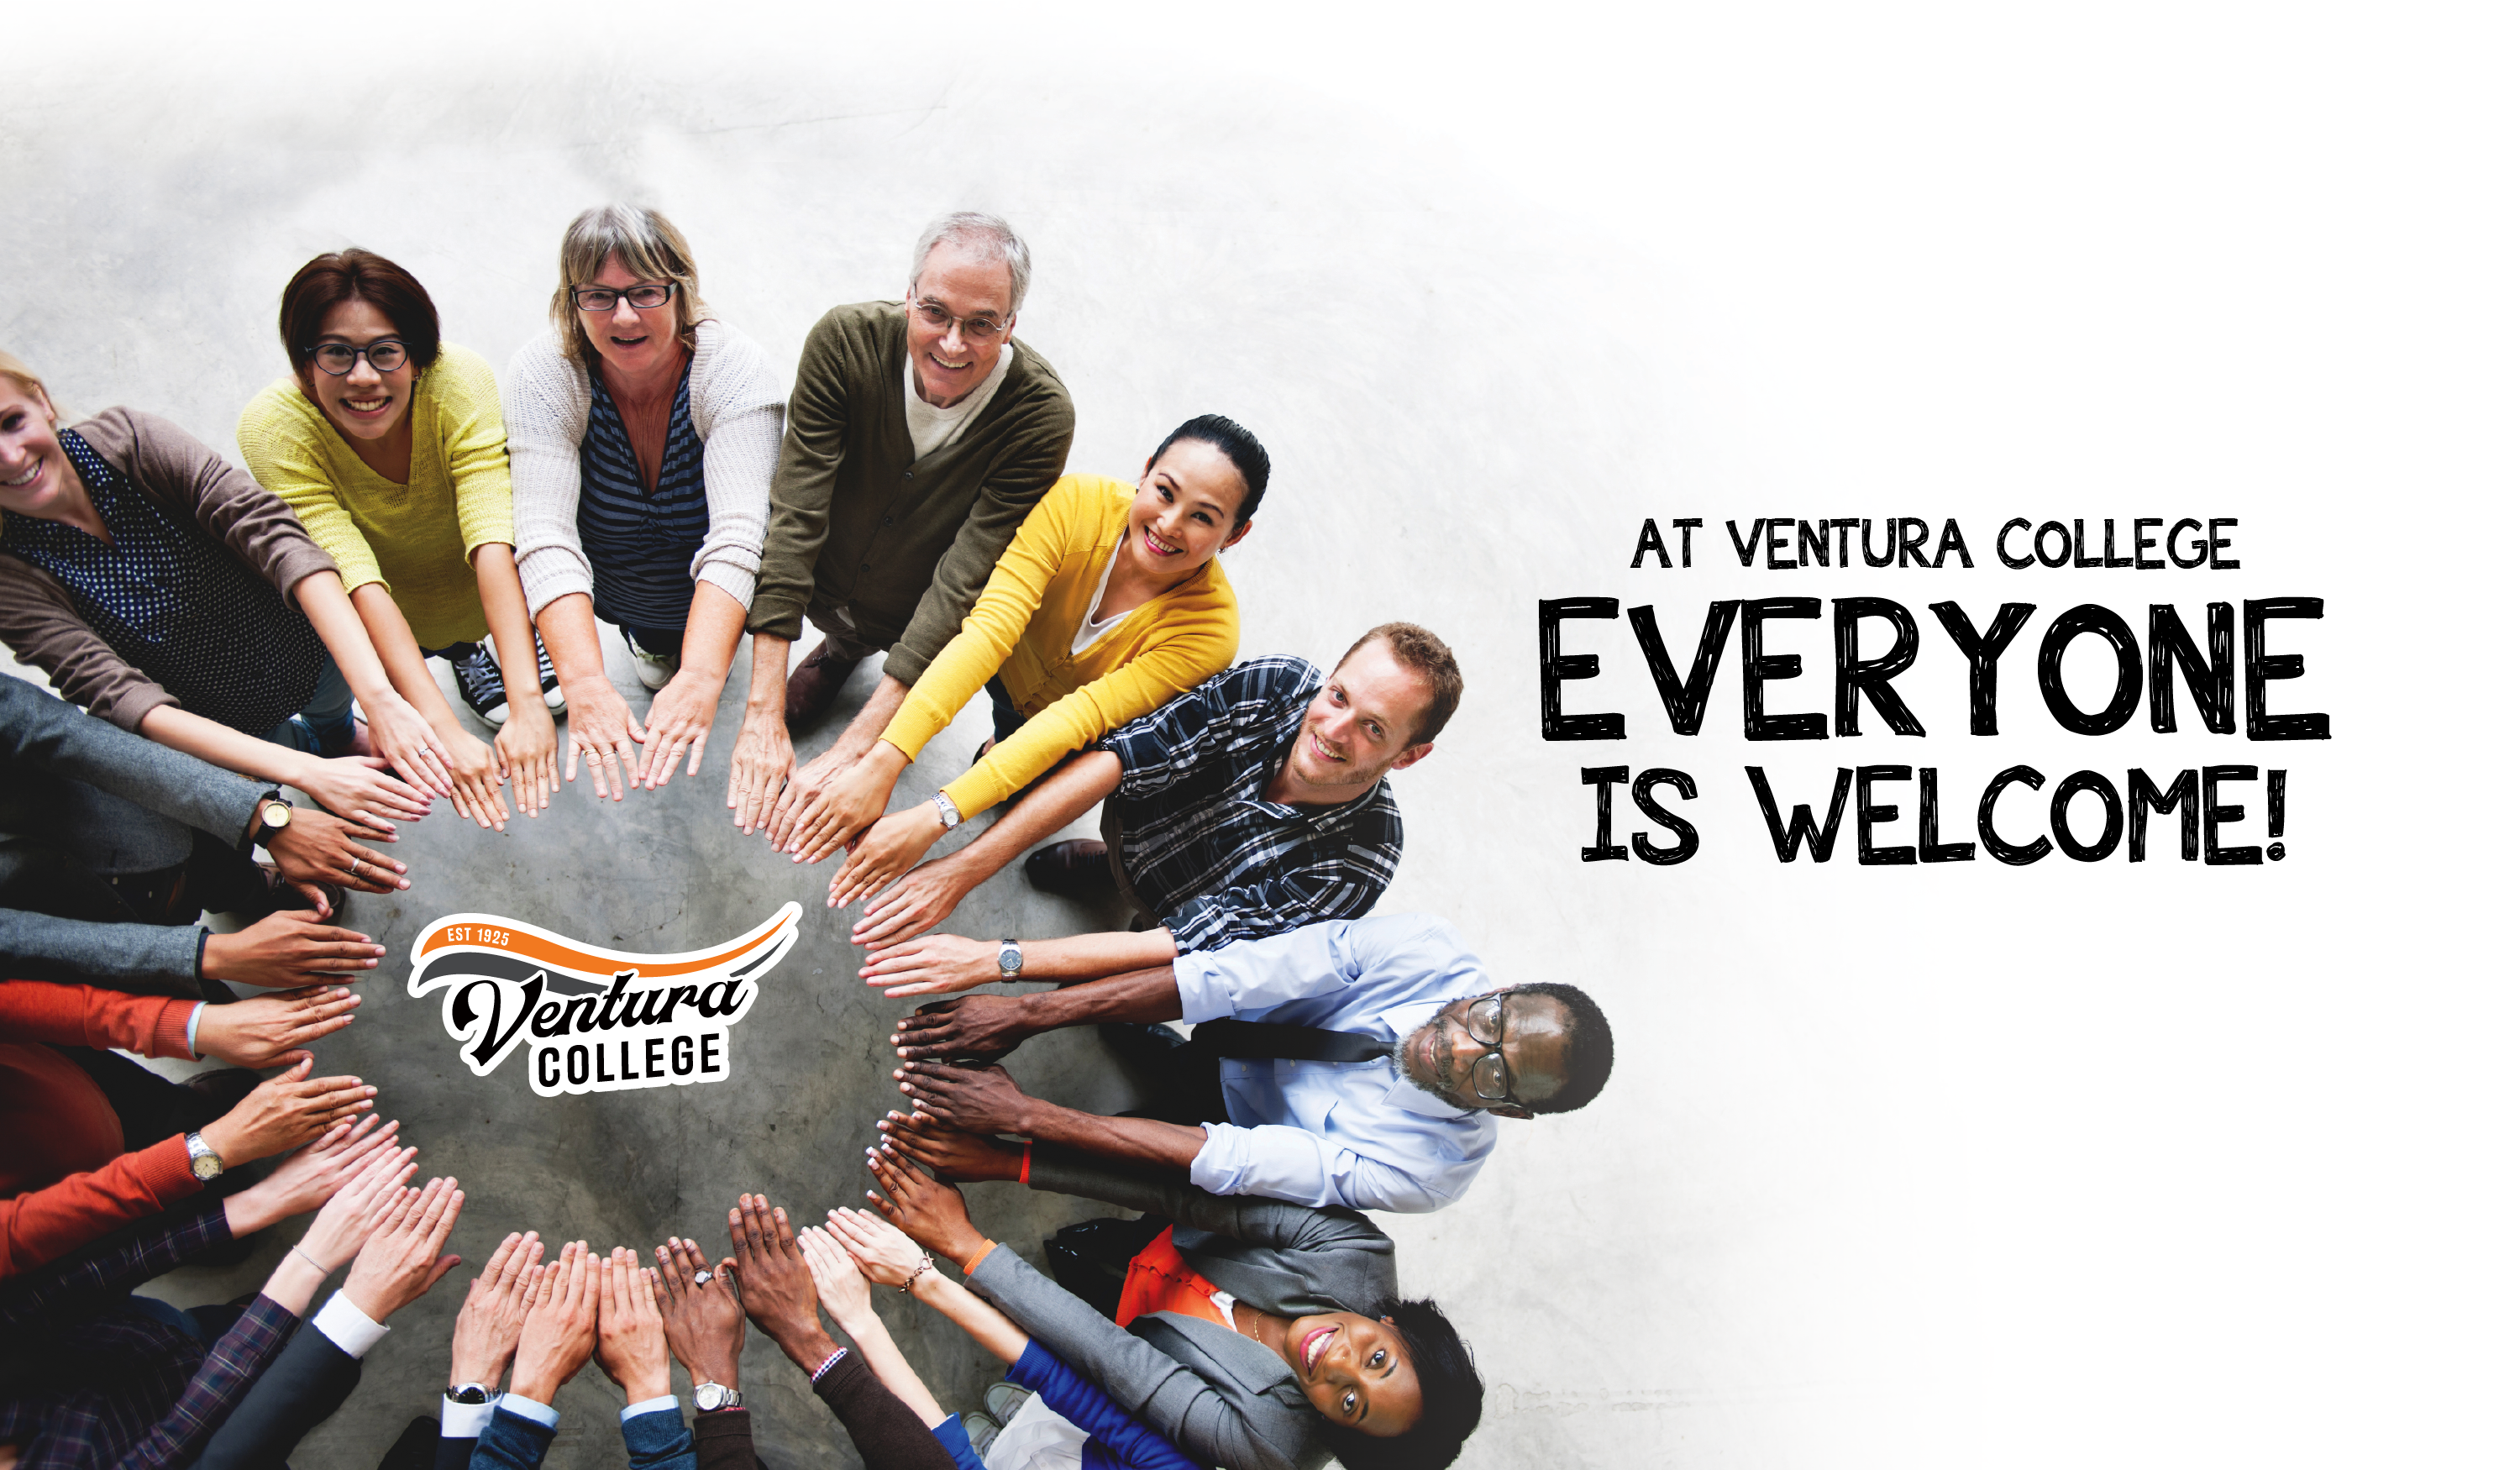 At Ventura College Everyone is Welcome!